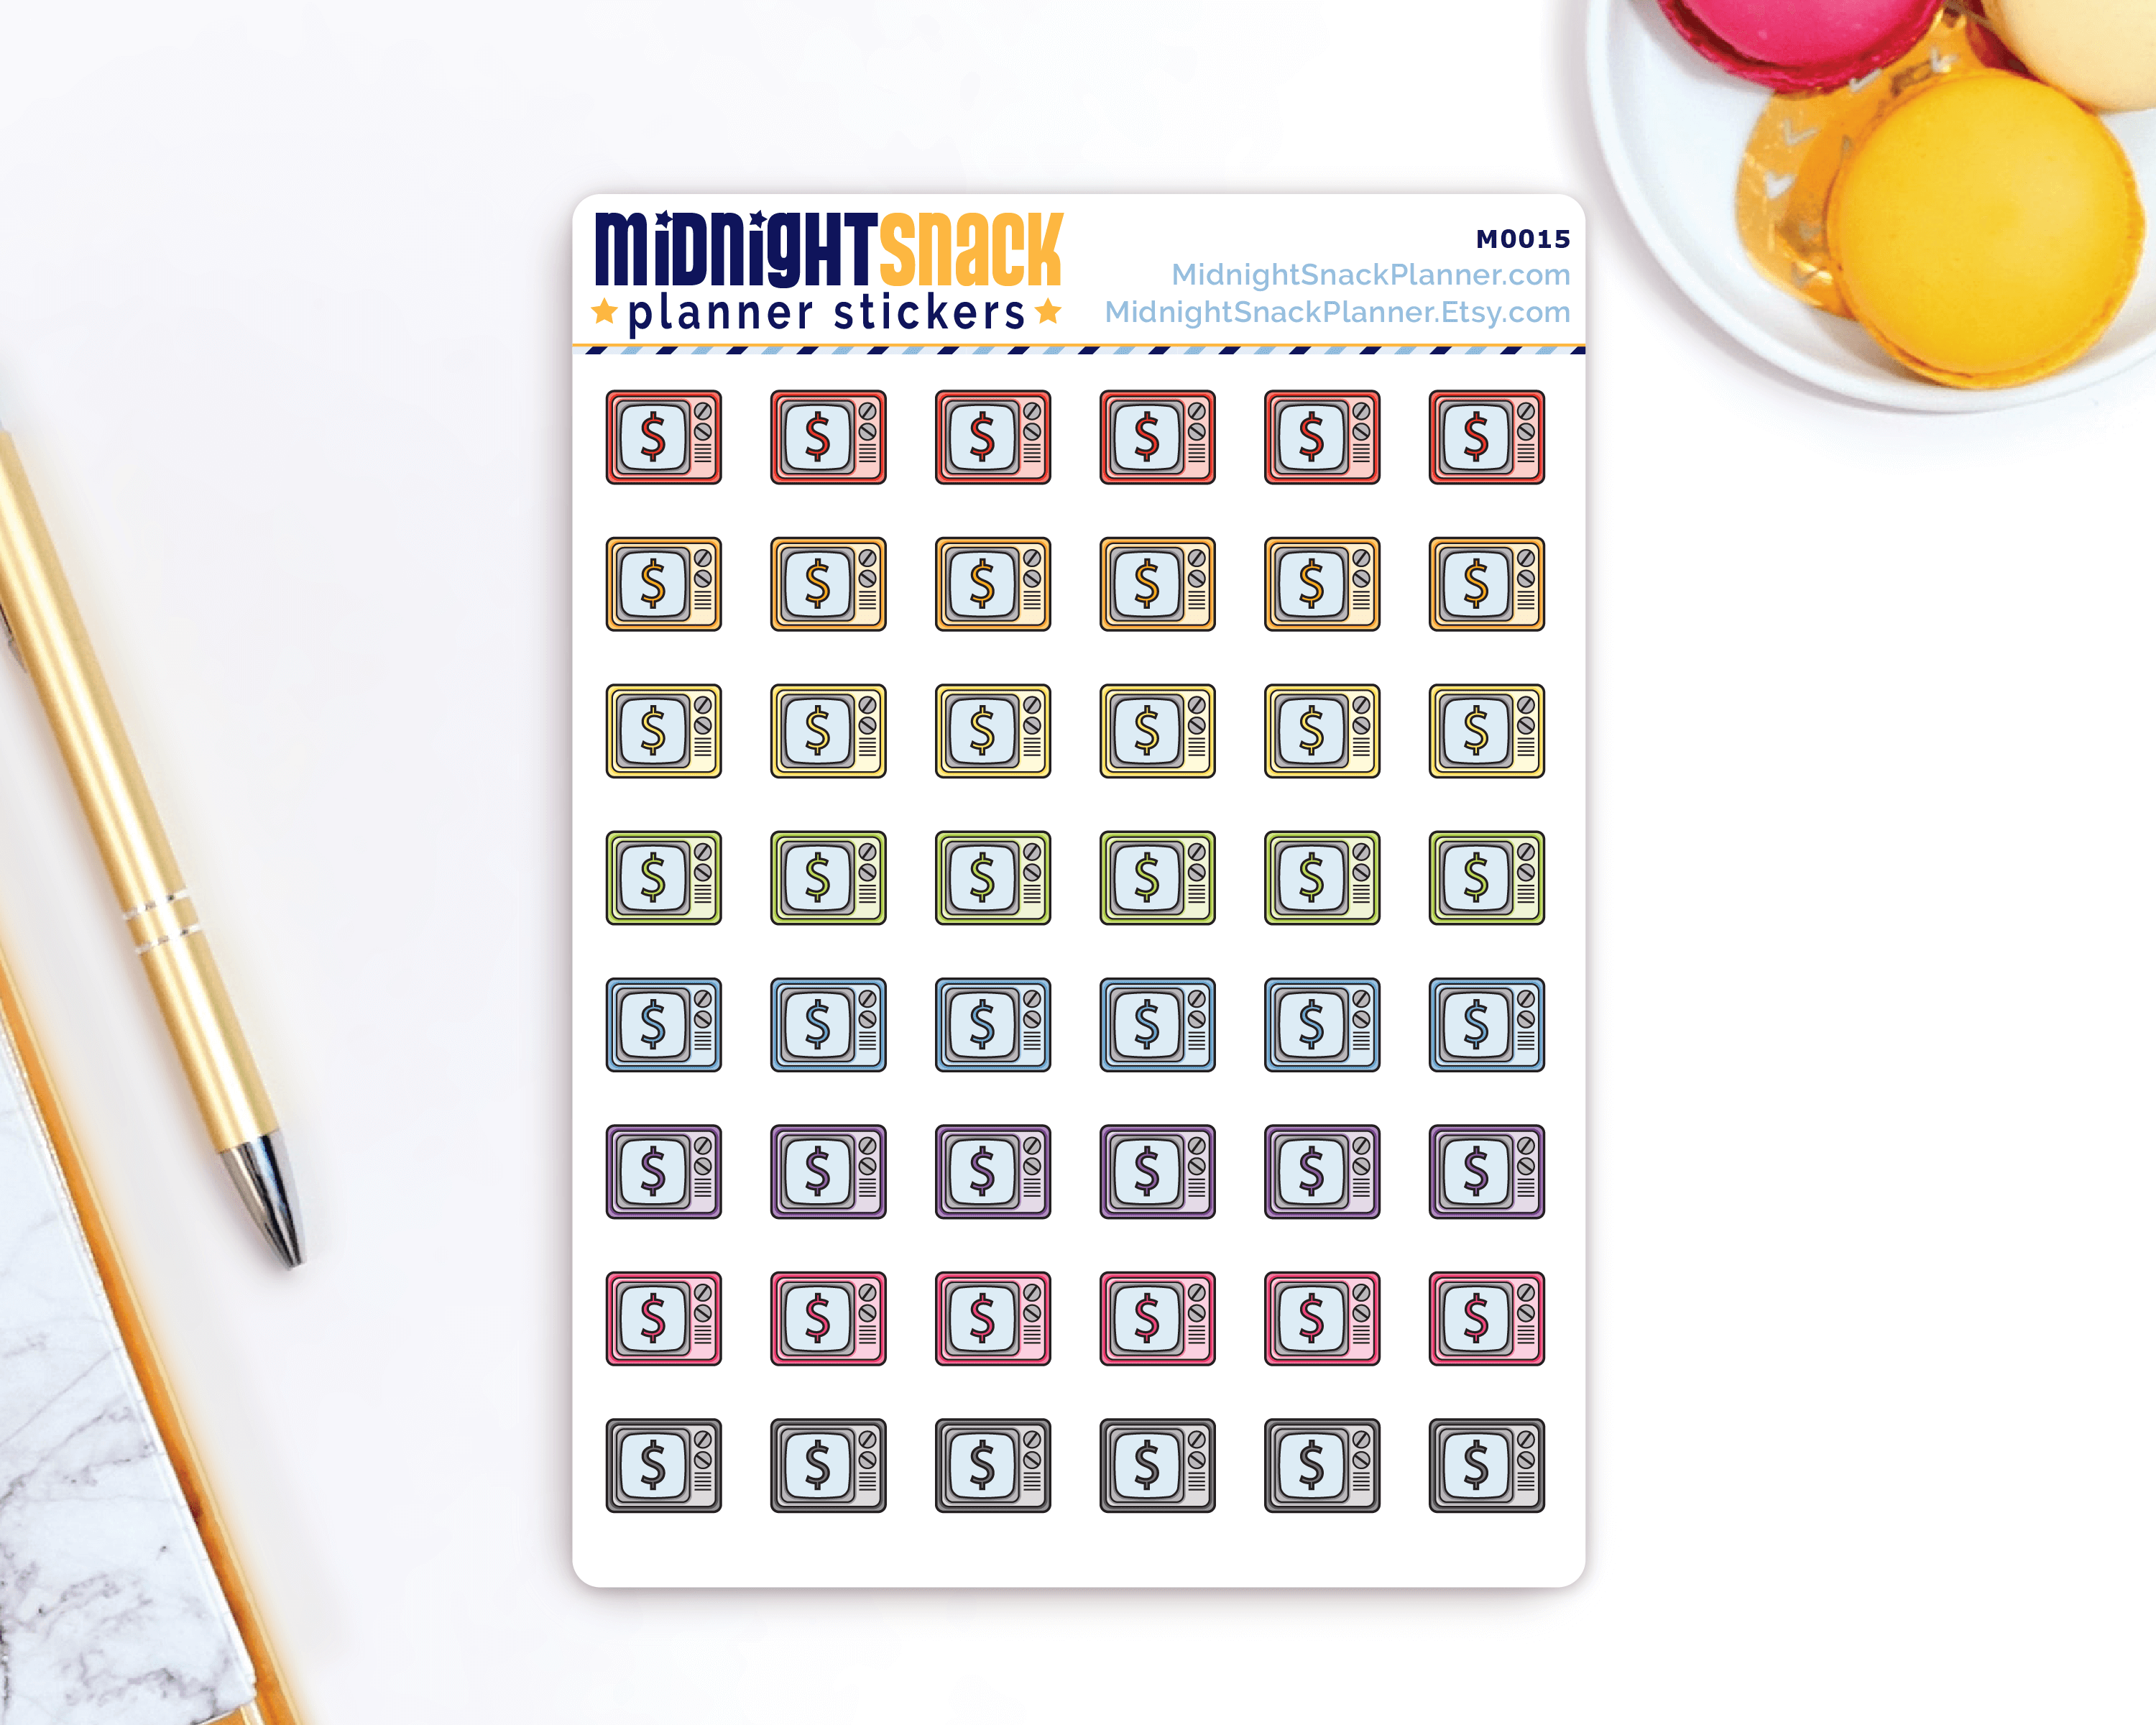 Television Icon: Cable or Satellite Bill Planner Stickers: Midnight Snack Planner